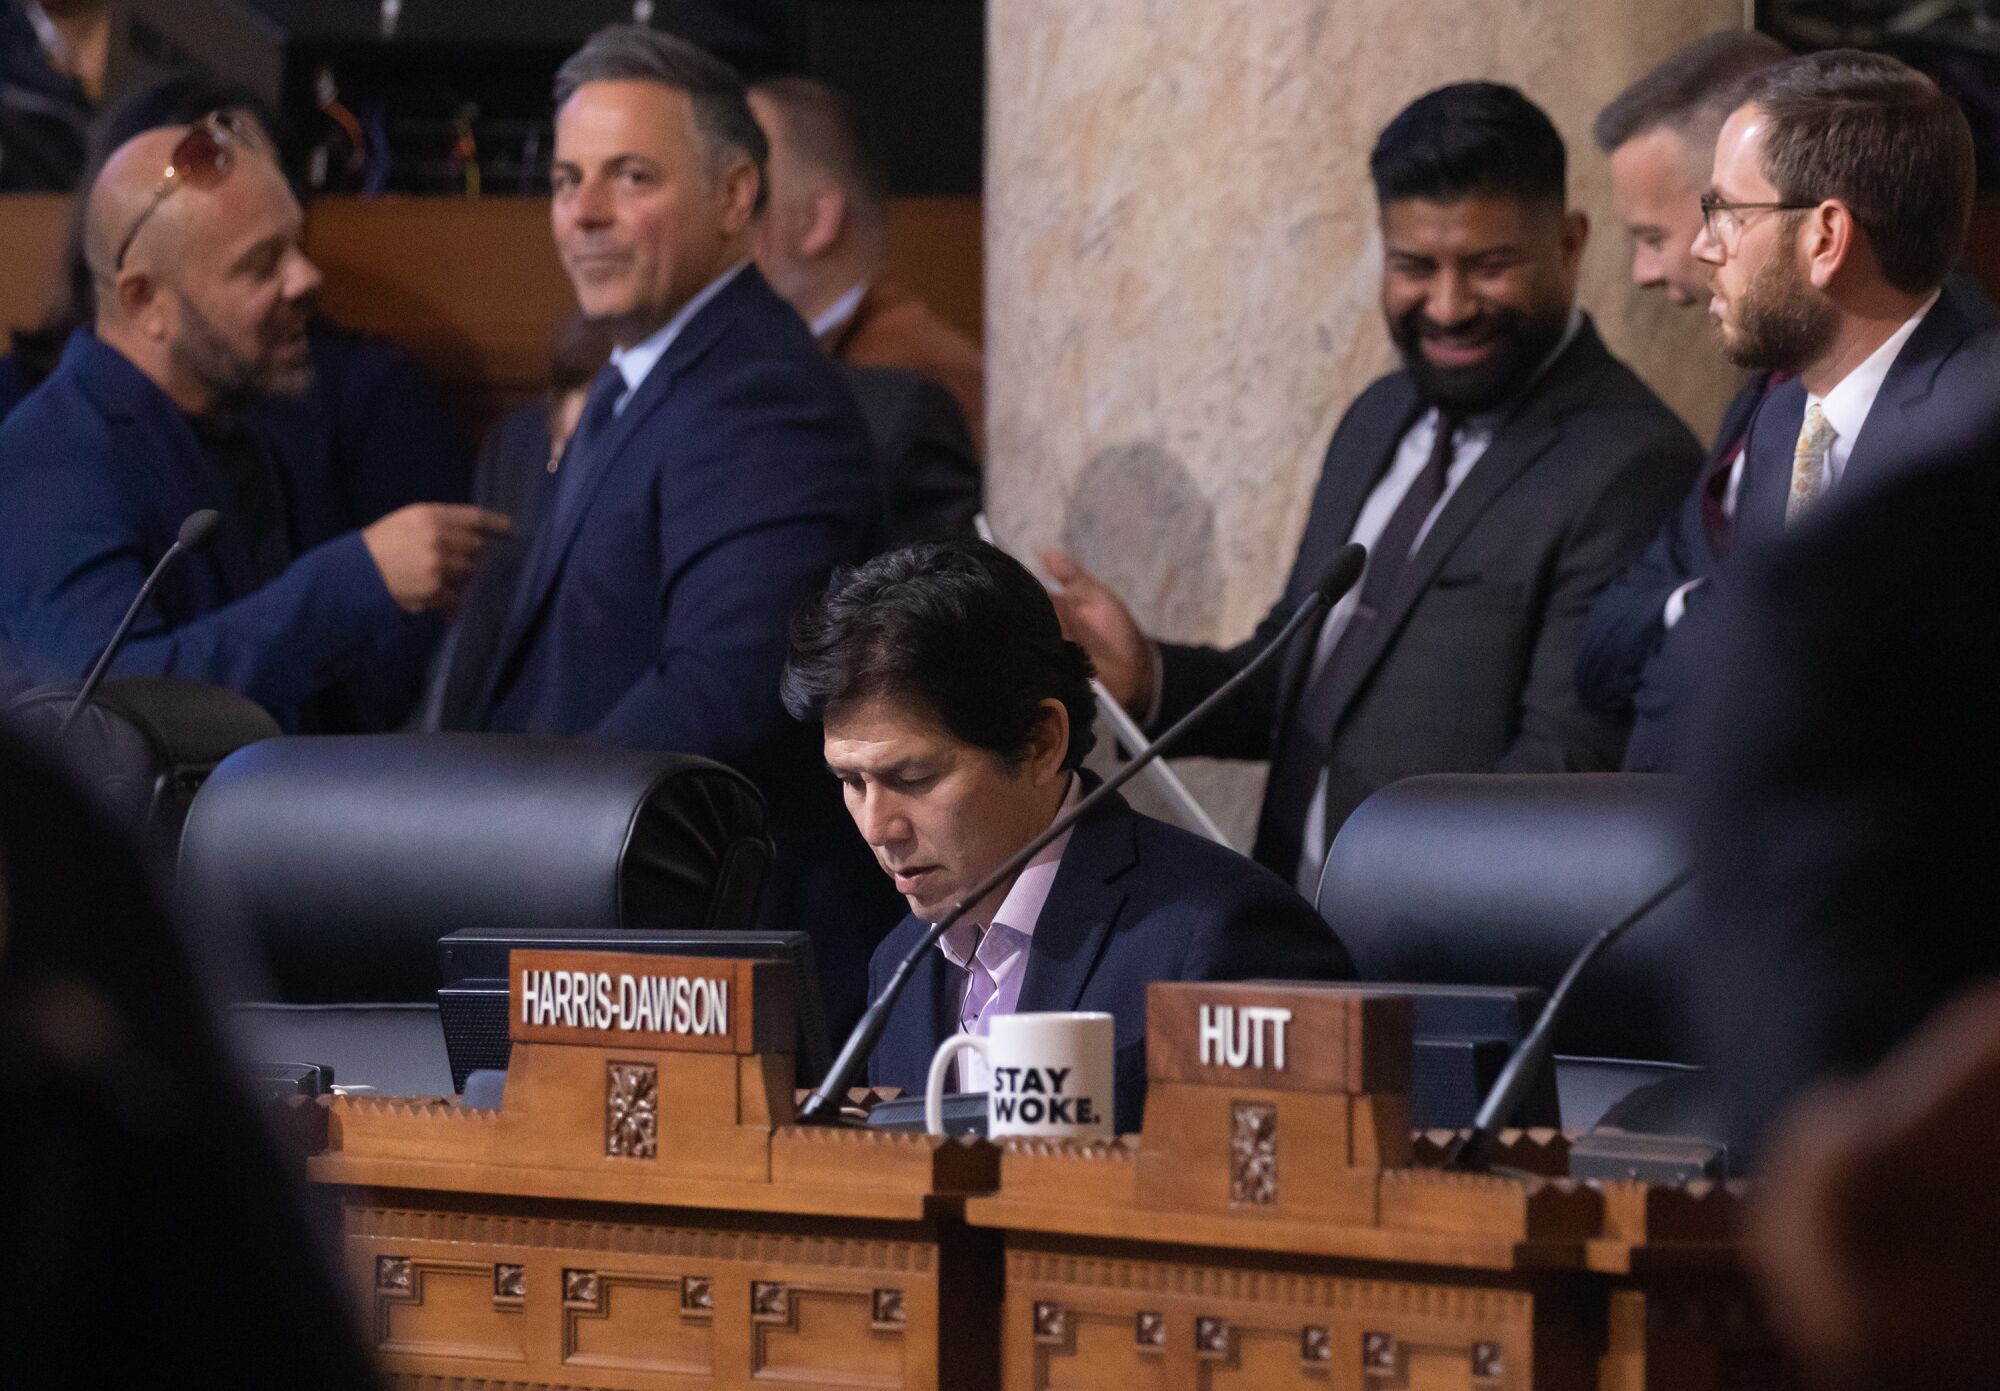 Los Angeles City Councilmember Kevin de León is seated as other people talk and move behind him.